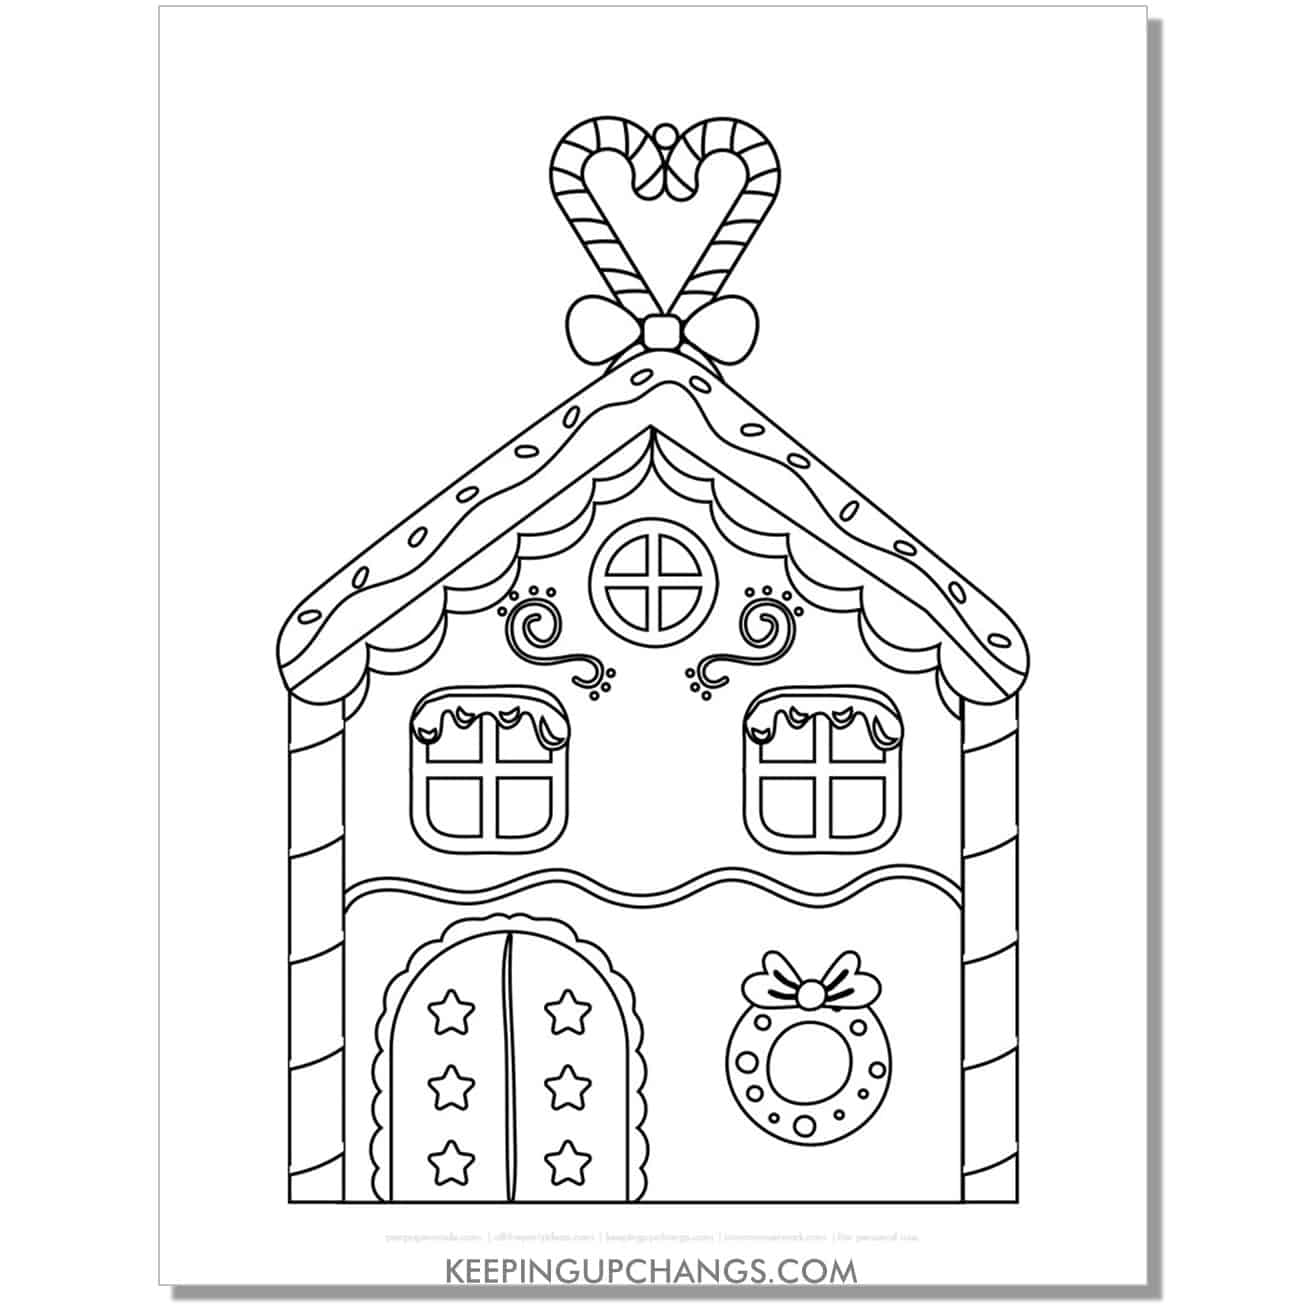 free detailed gingerbread house coloring page for kids.